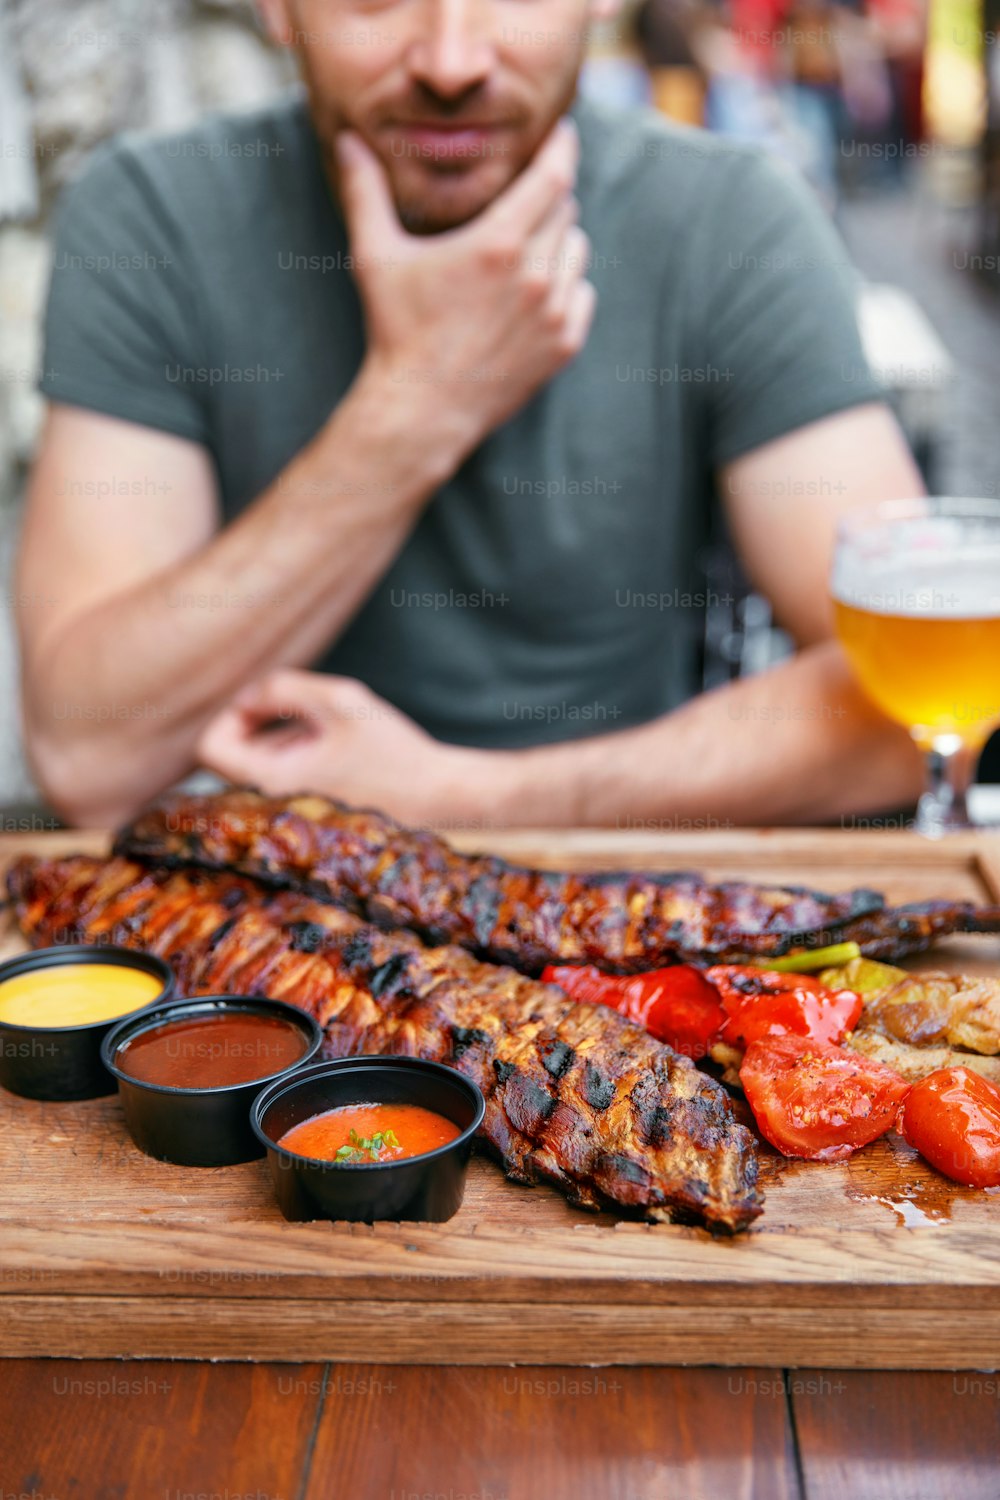 Barbecue Meat With Vegetables And Beer In Restaurant. Man Eating Grill Pork Ribs Closeup. High Resolution